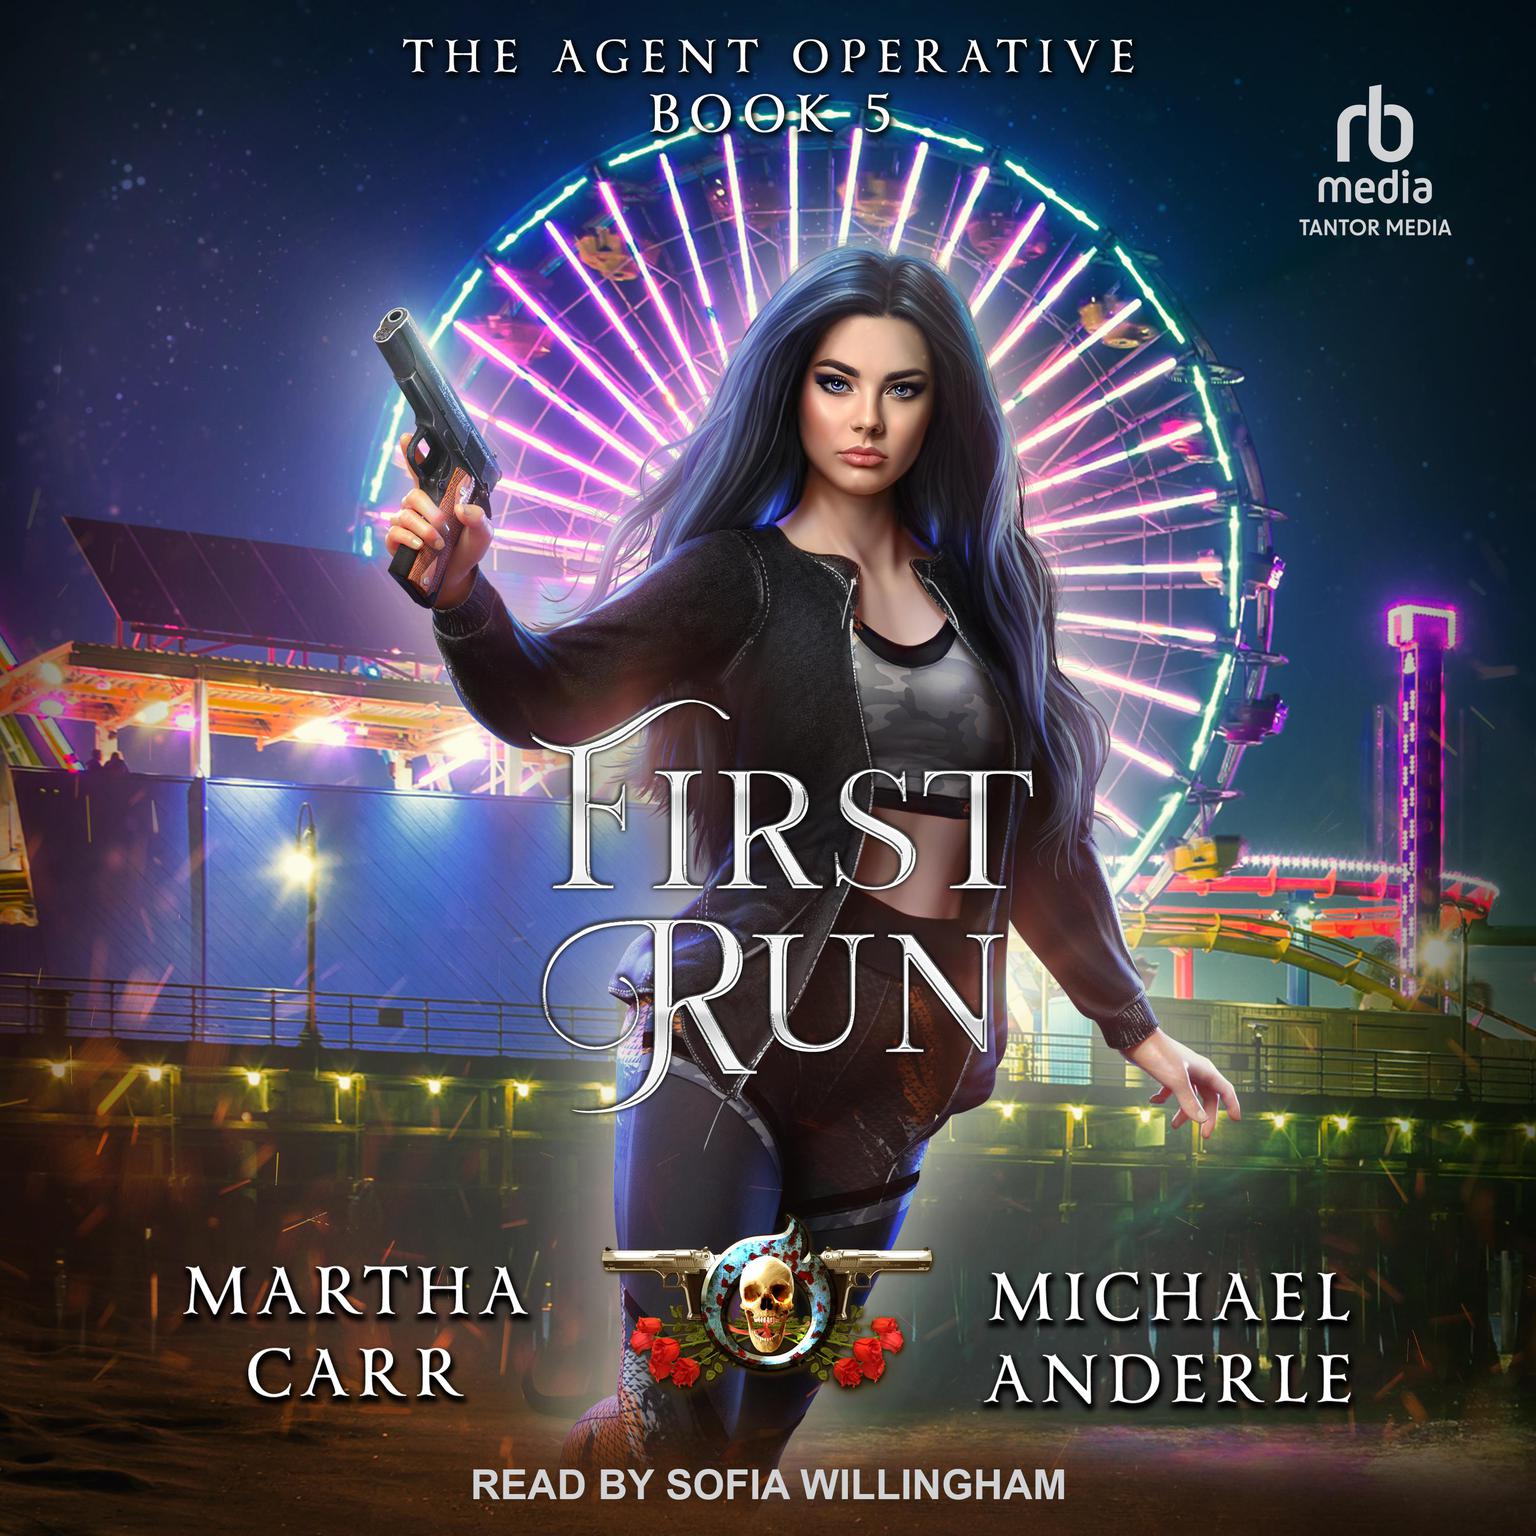 First Run Audiobook, by Michael Anderle